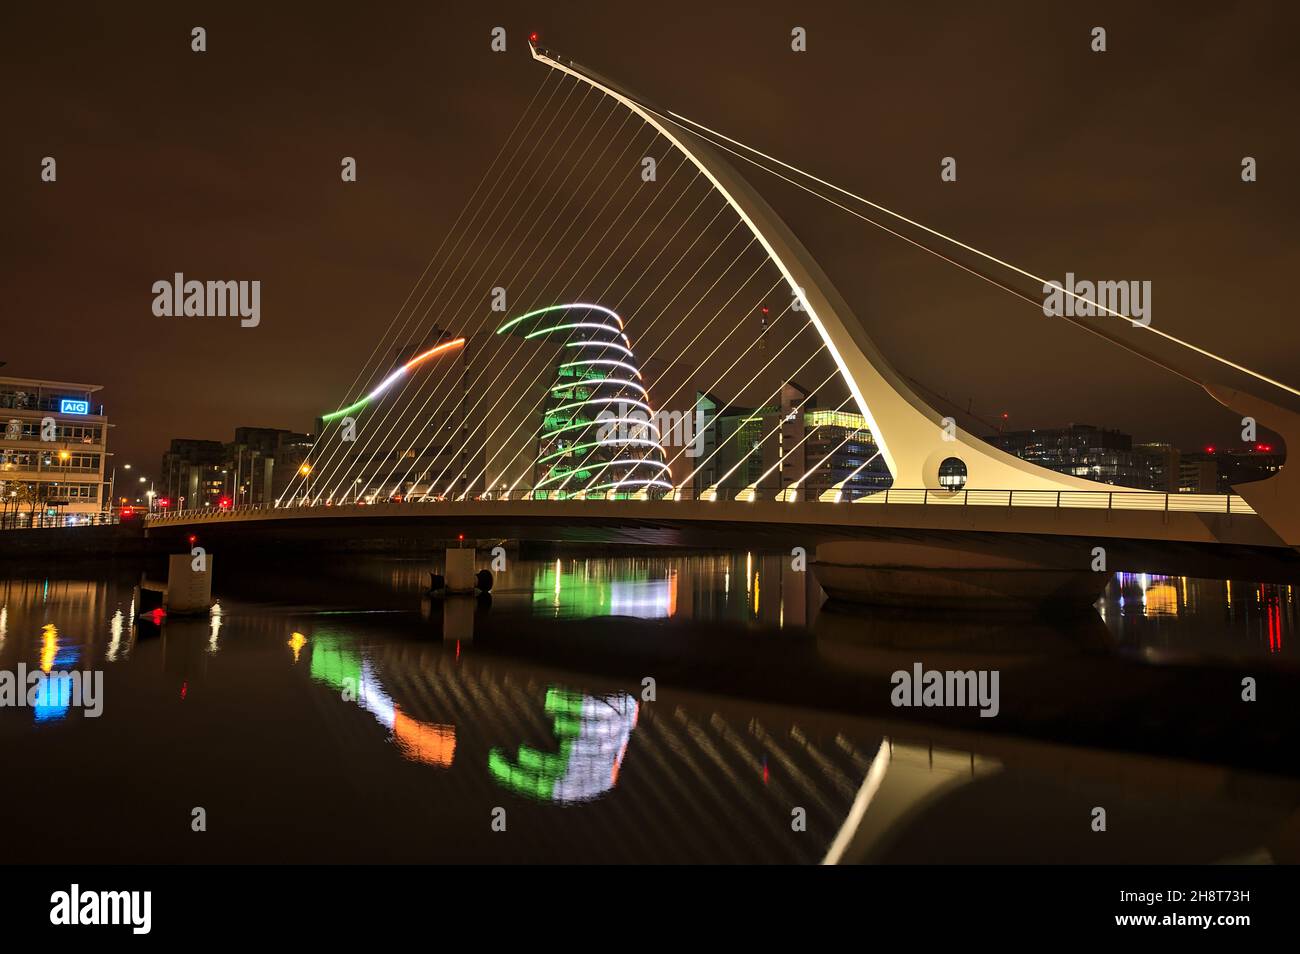 Dublin, Ireland - November 13, 2021: Beautiful wide angle evening view of Samuel Beckett Bridge and The Convention Centre Dublin with ring beam lights Stock Photo